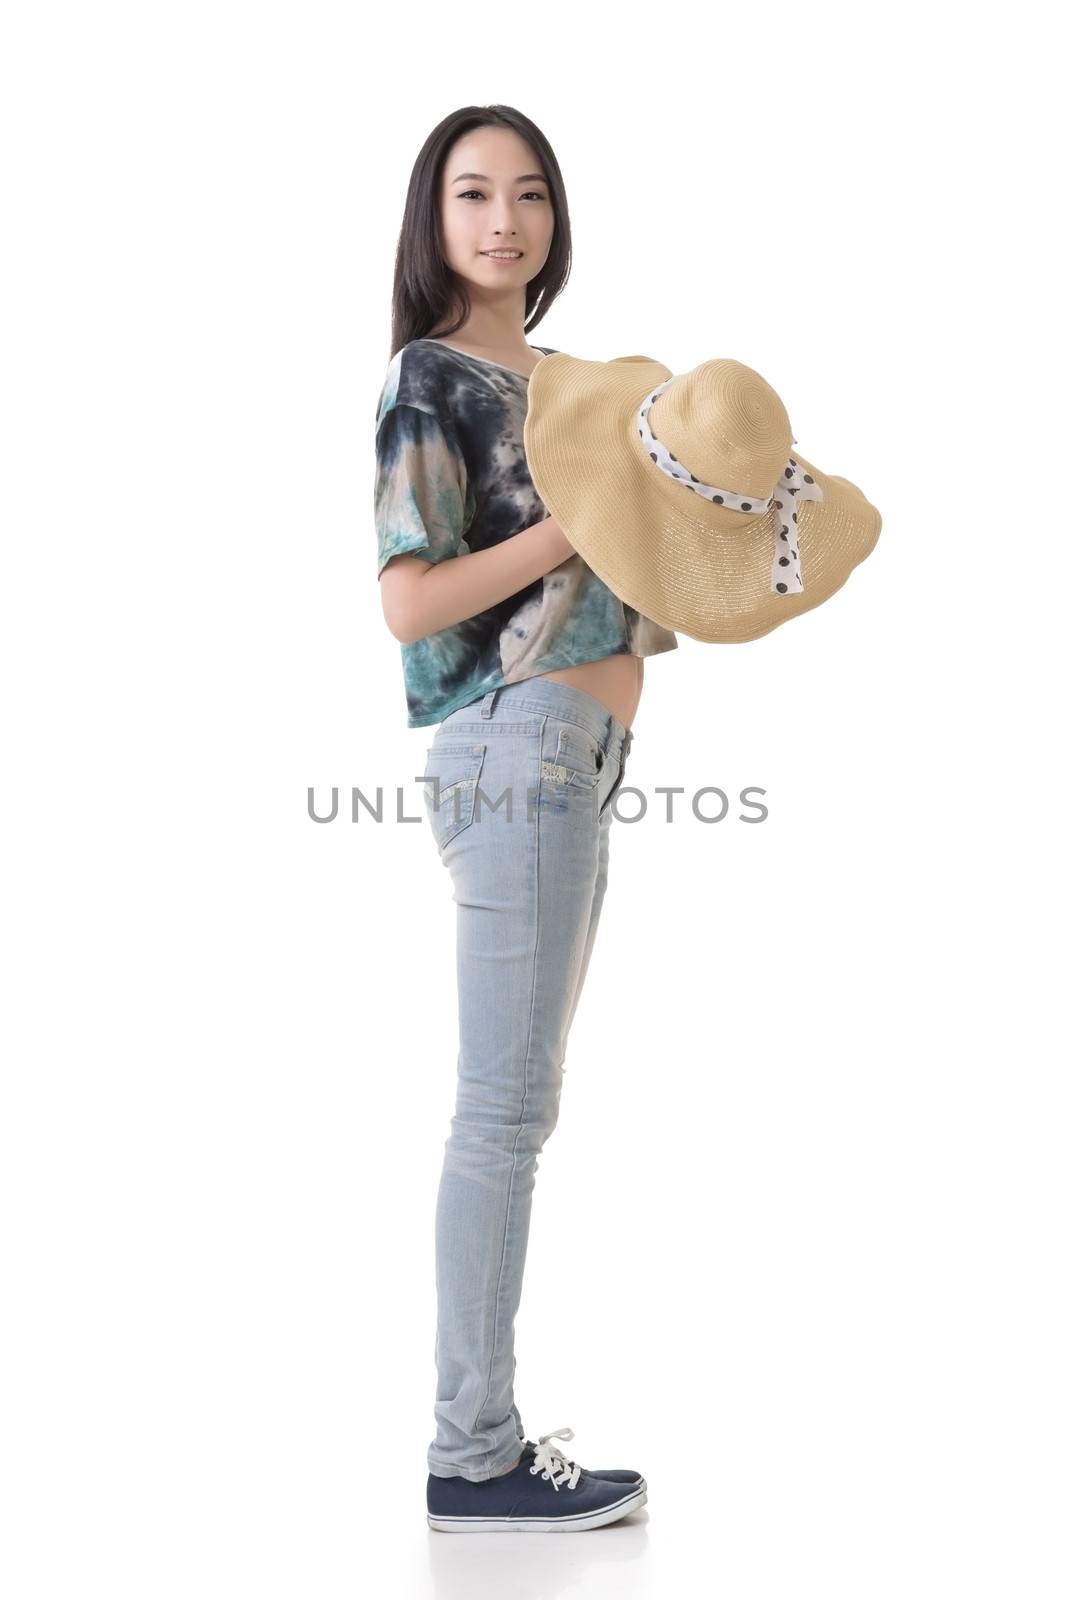 Asian beauty with hat, full length portrait isolated on white.